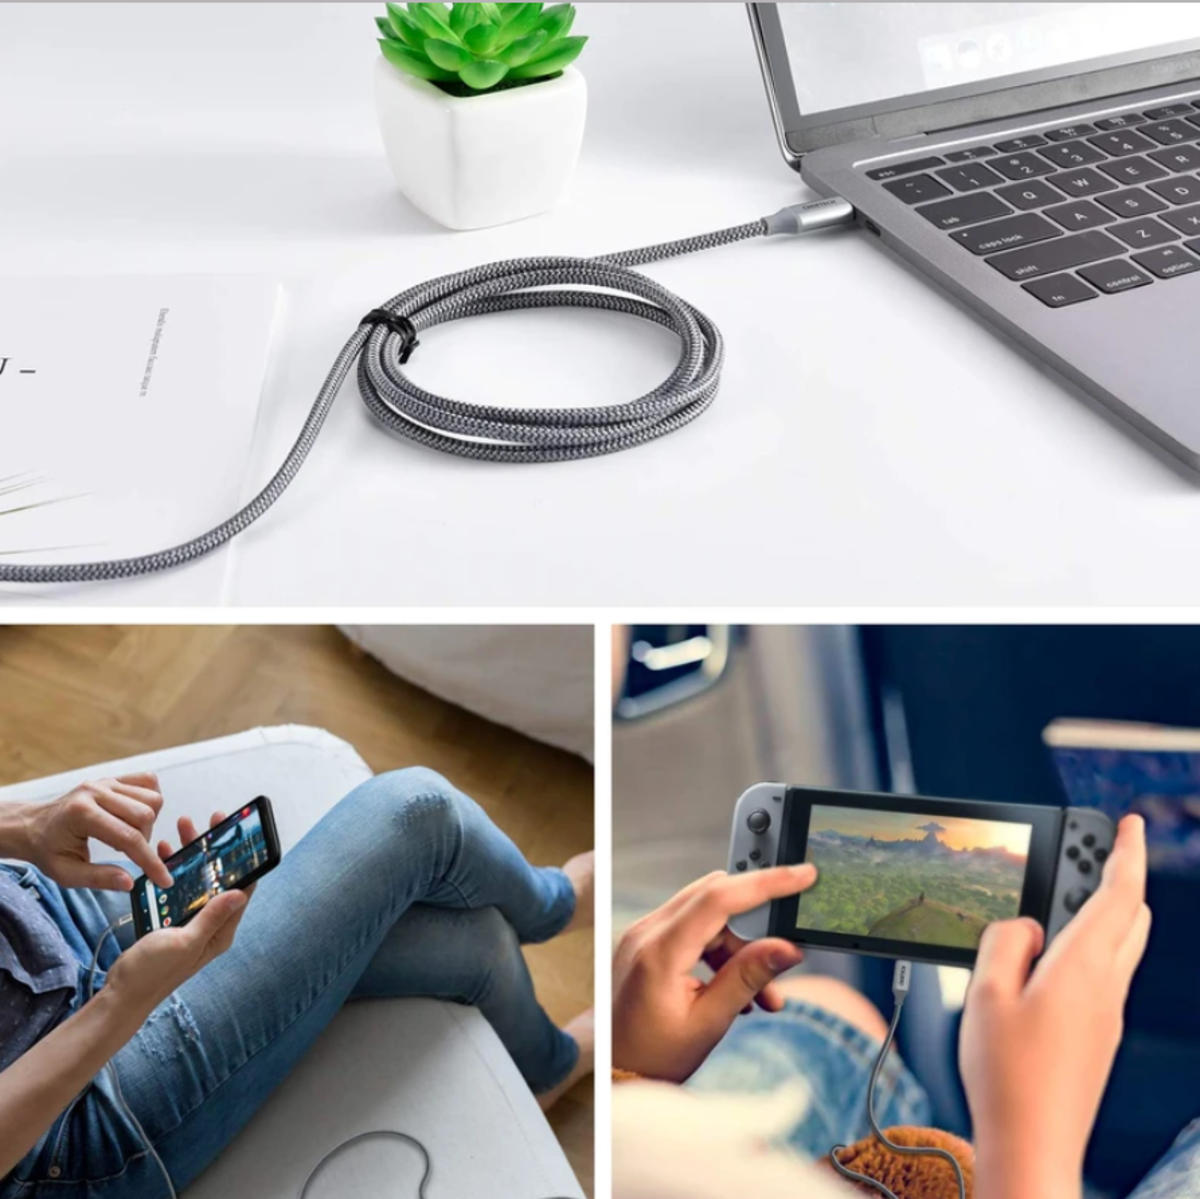 choetech-60w-charger-review-an-ultra-usb-c-adapter-that-rapidly-charges-your-devices